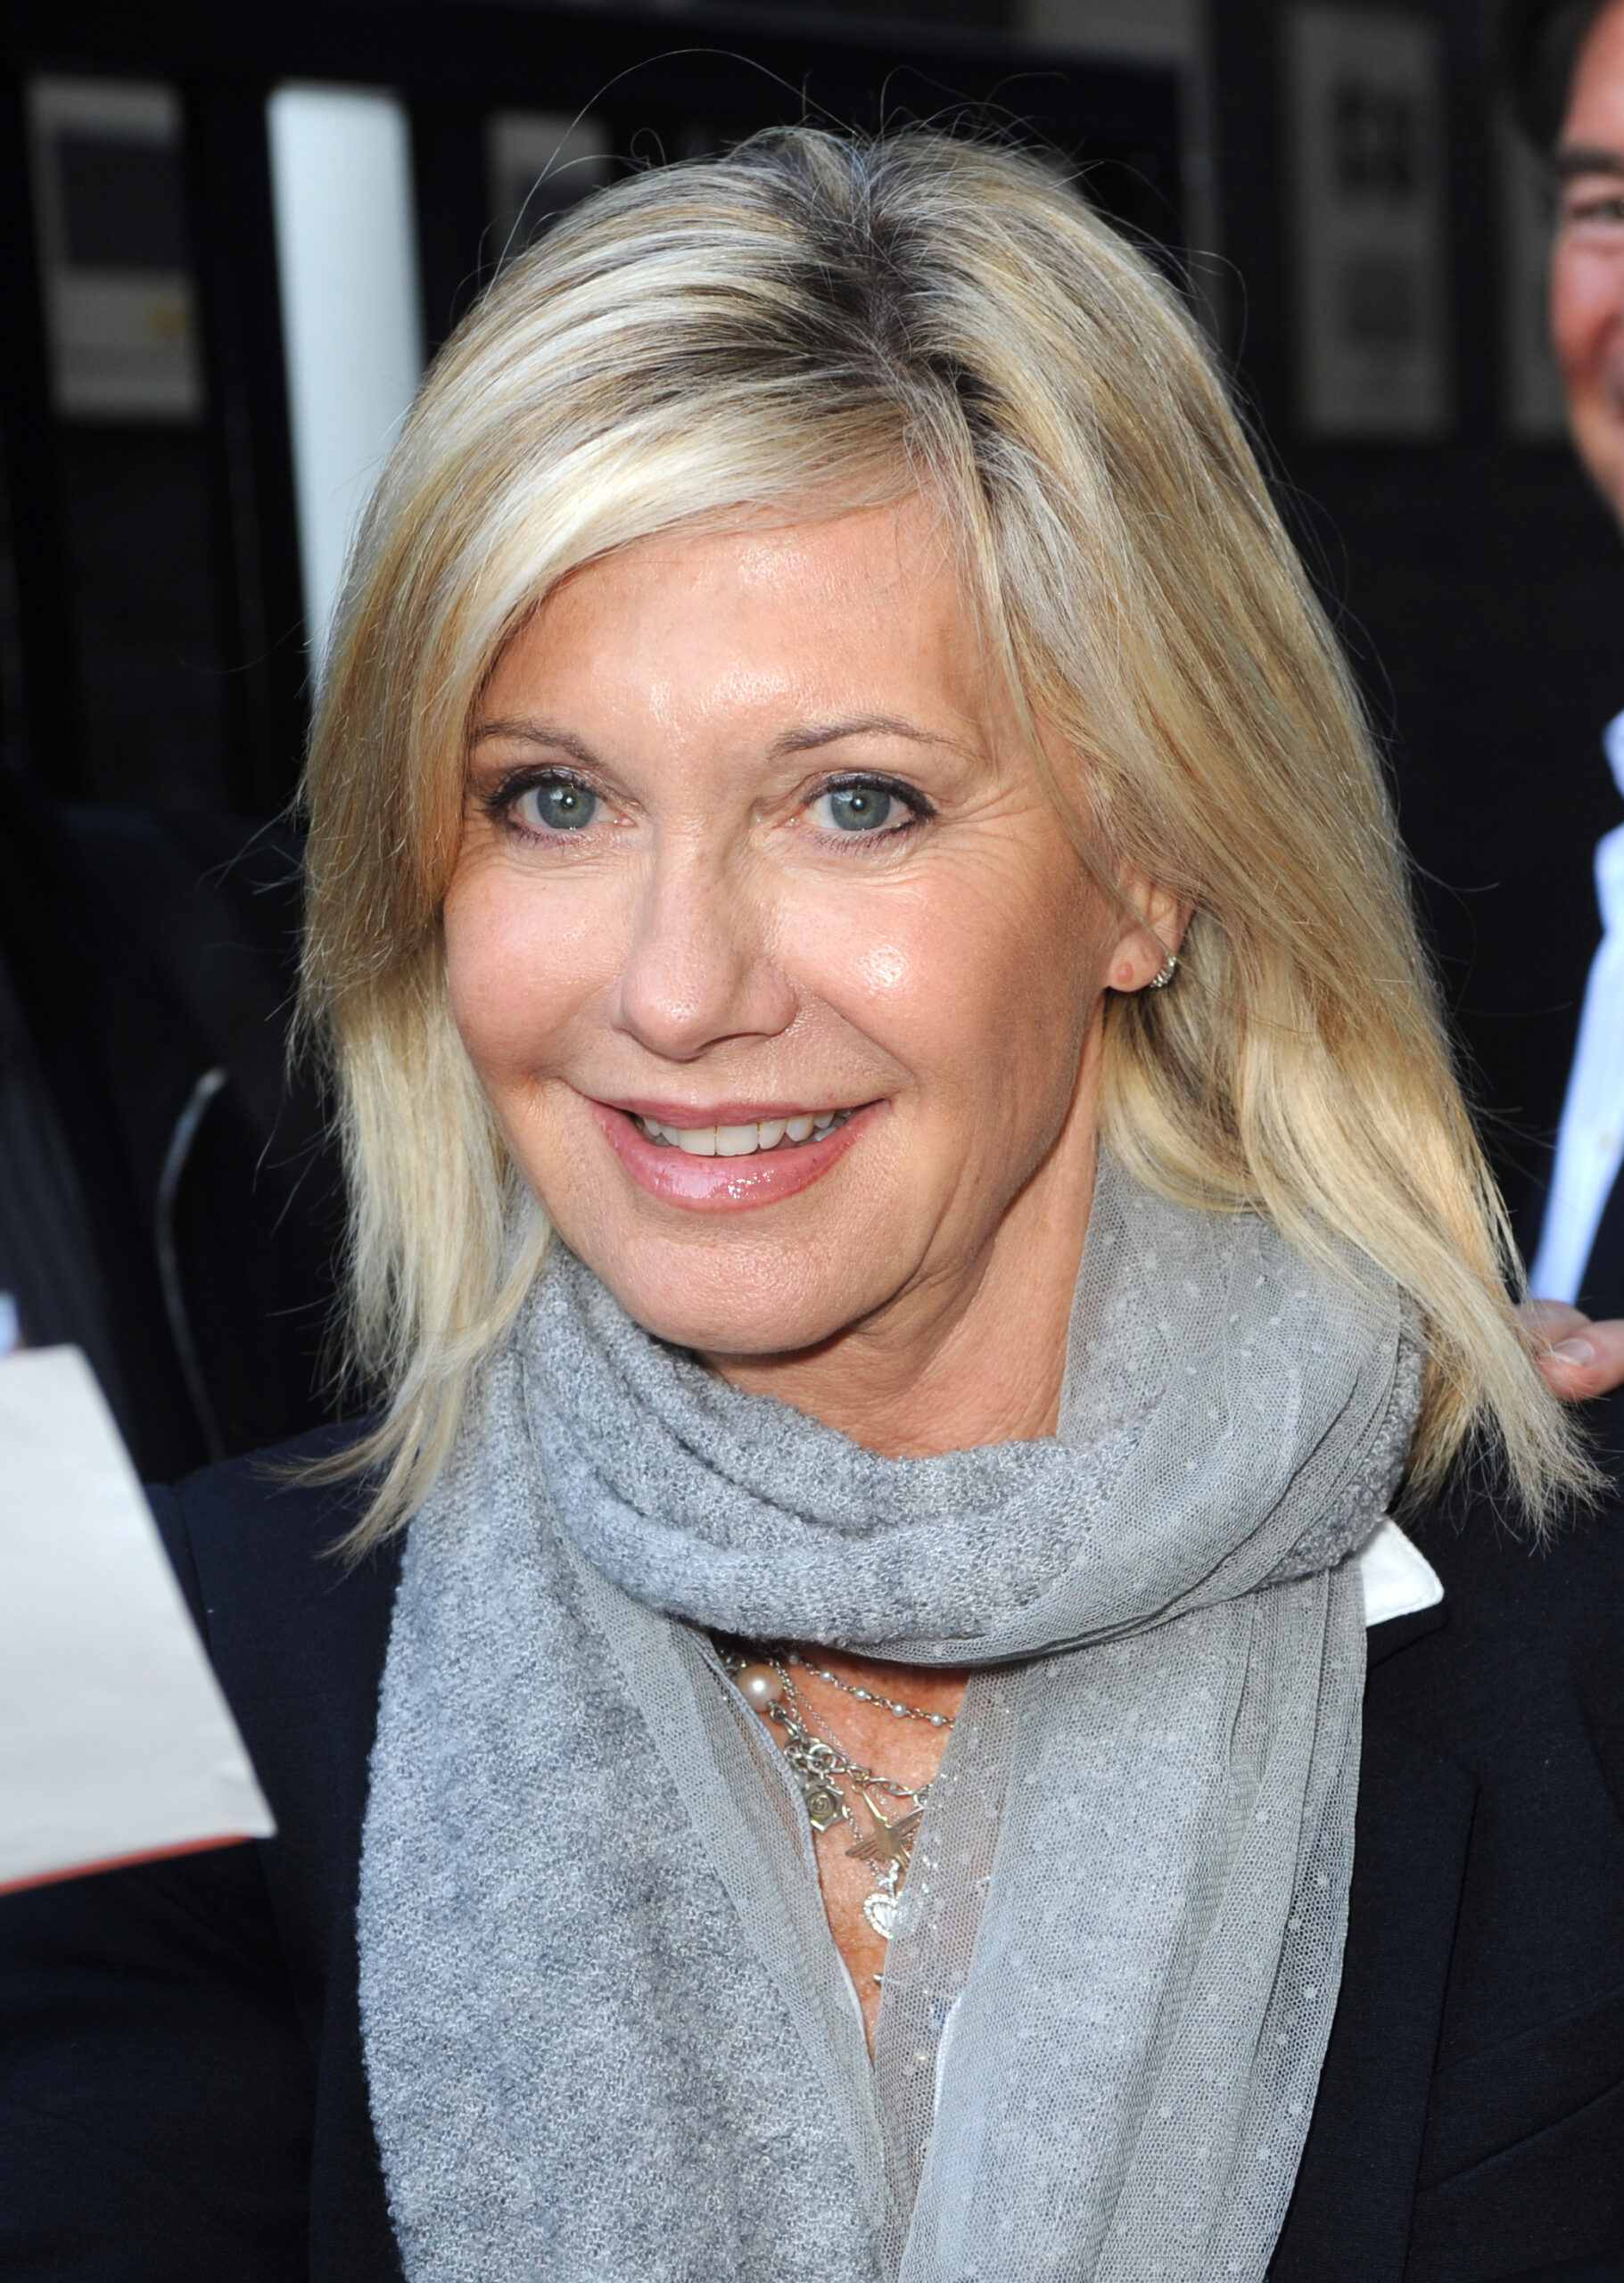 “I’m stronger than I thought I was…” Olivia Newton-John speaks about living with cancer